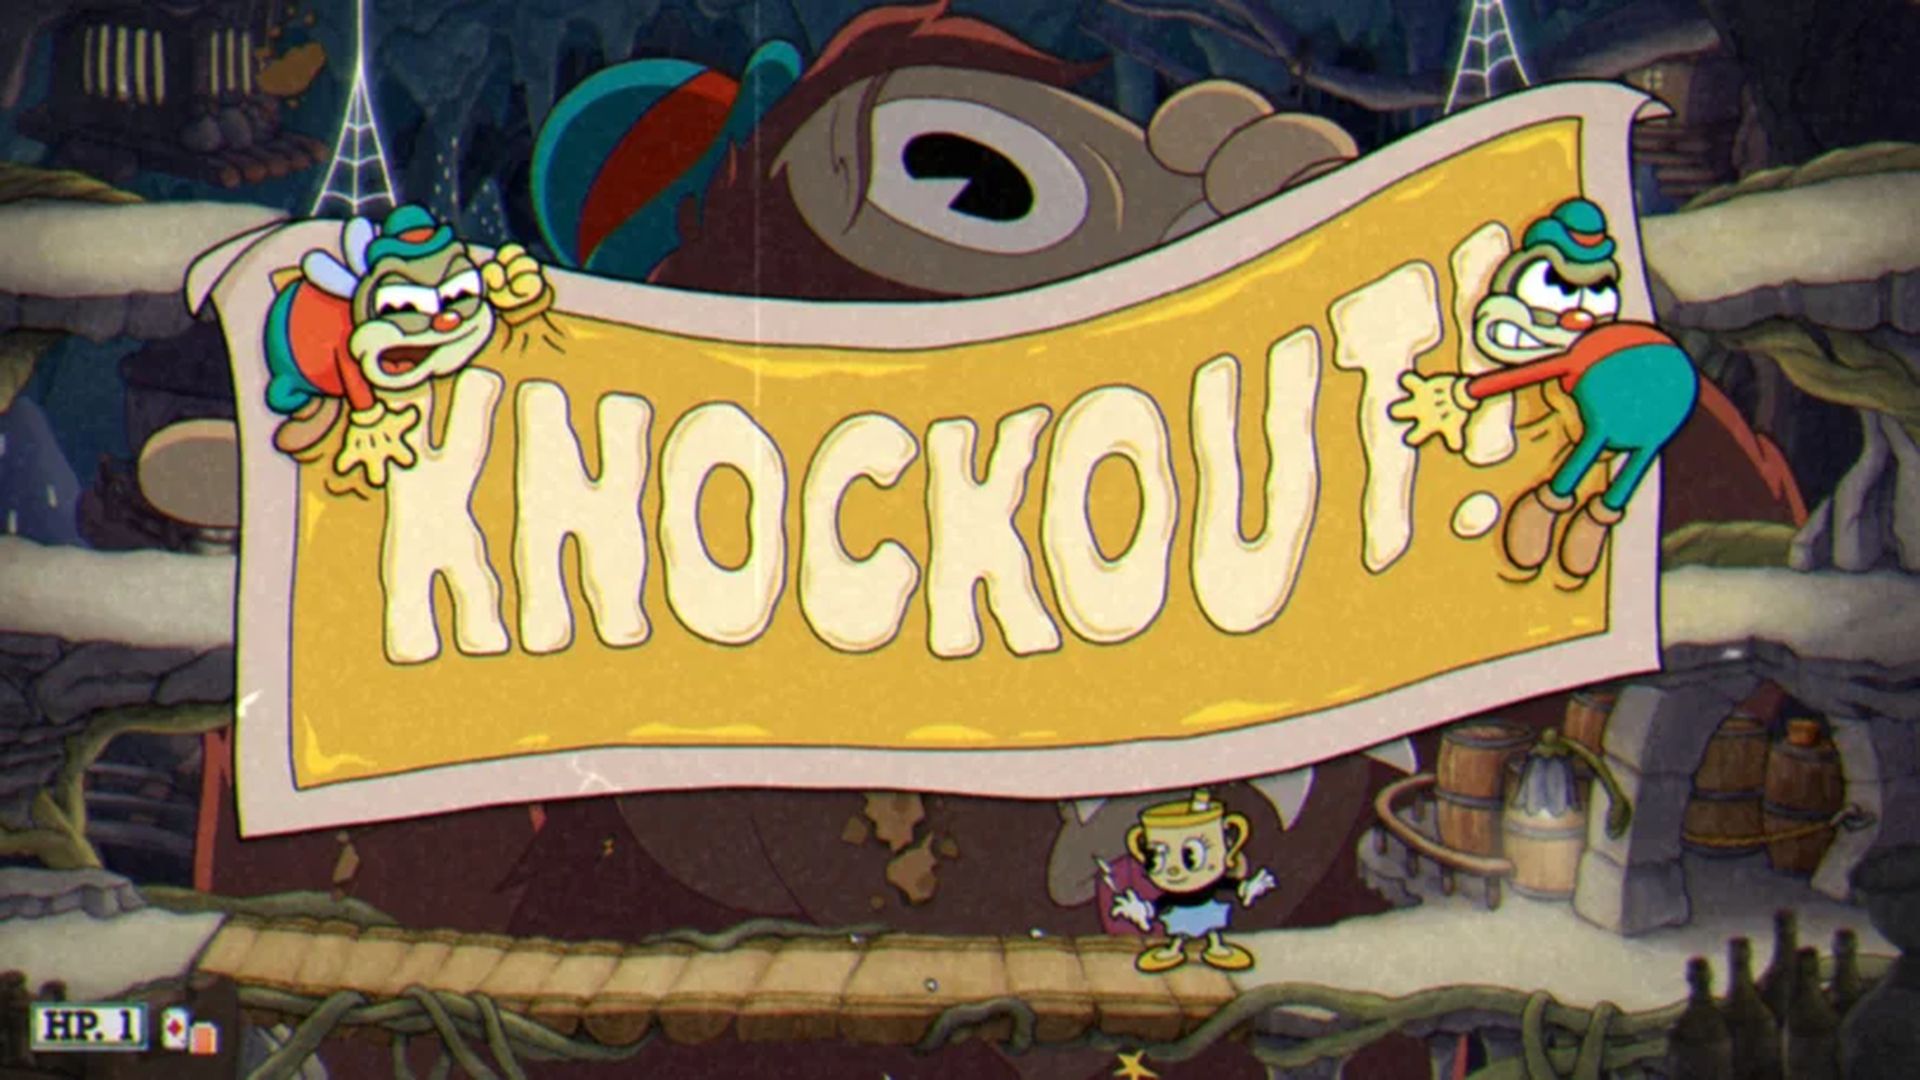 Today we are going to tell you how to beat Cuphead Moonshine Mob boss. One of the first boss battles in Cuphead's Delicious Last Course DLC is the Moonshine Mob.